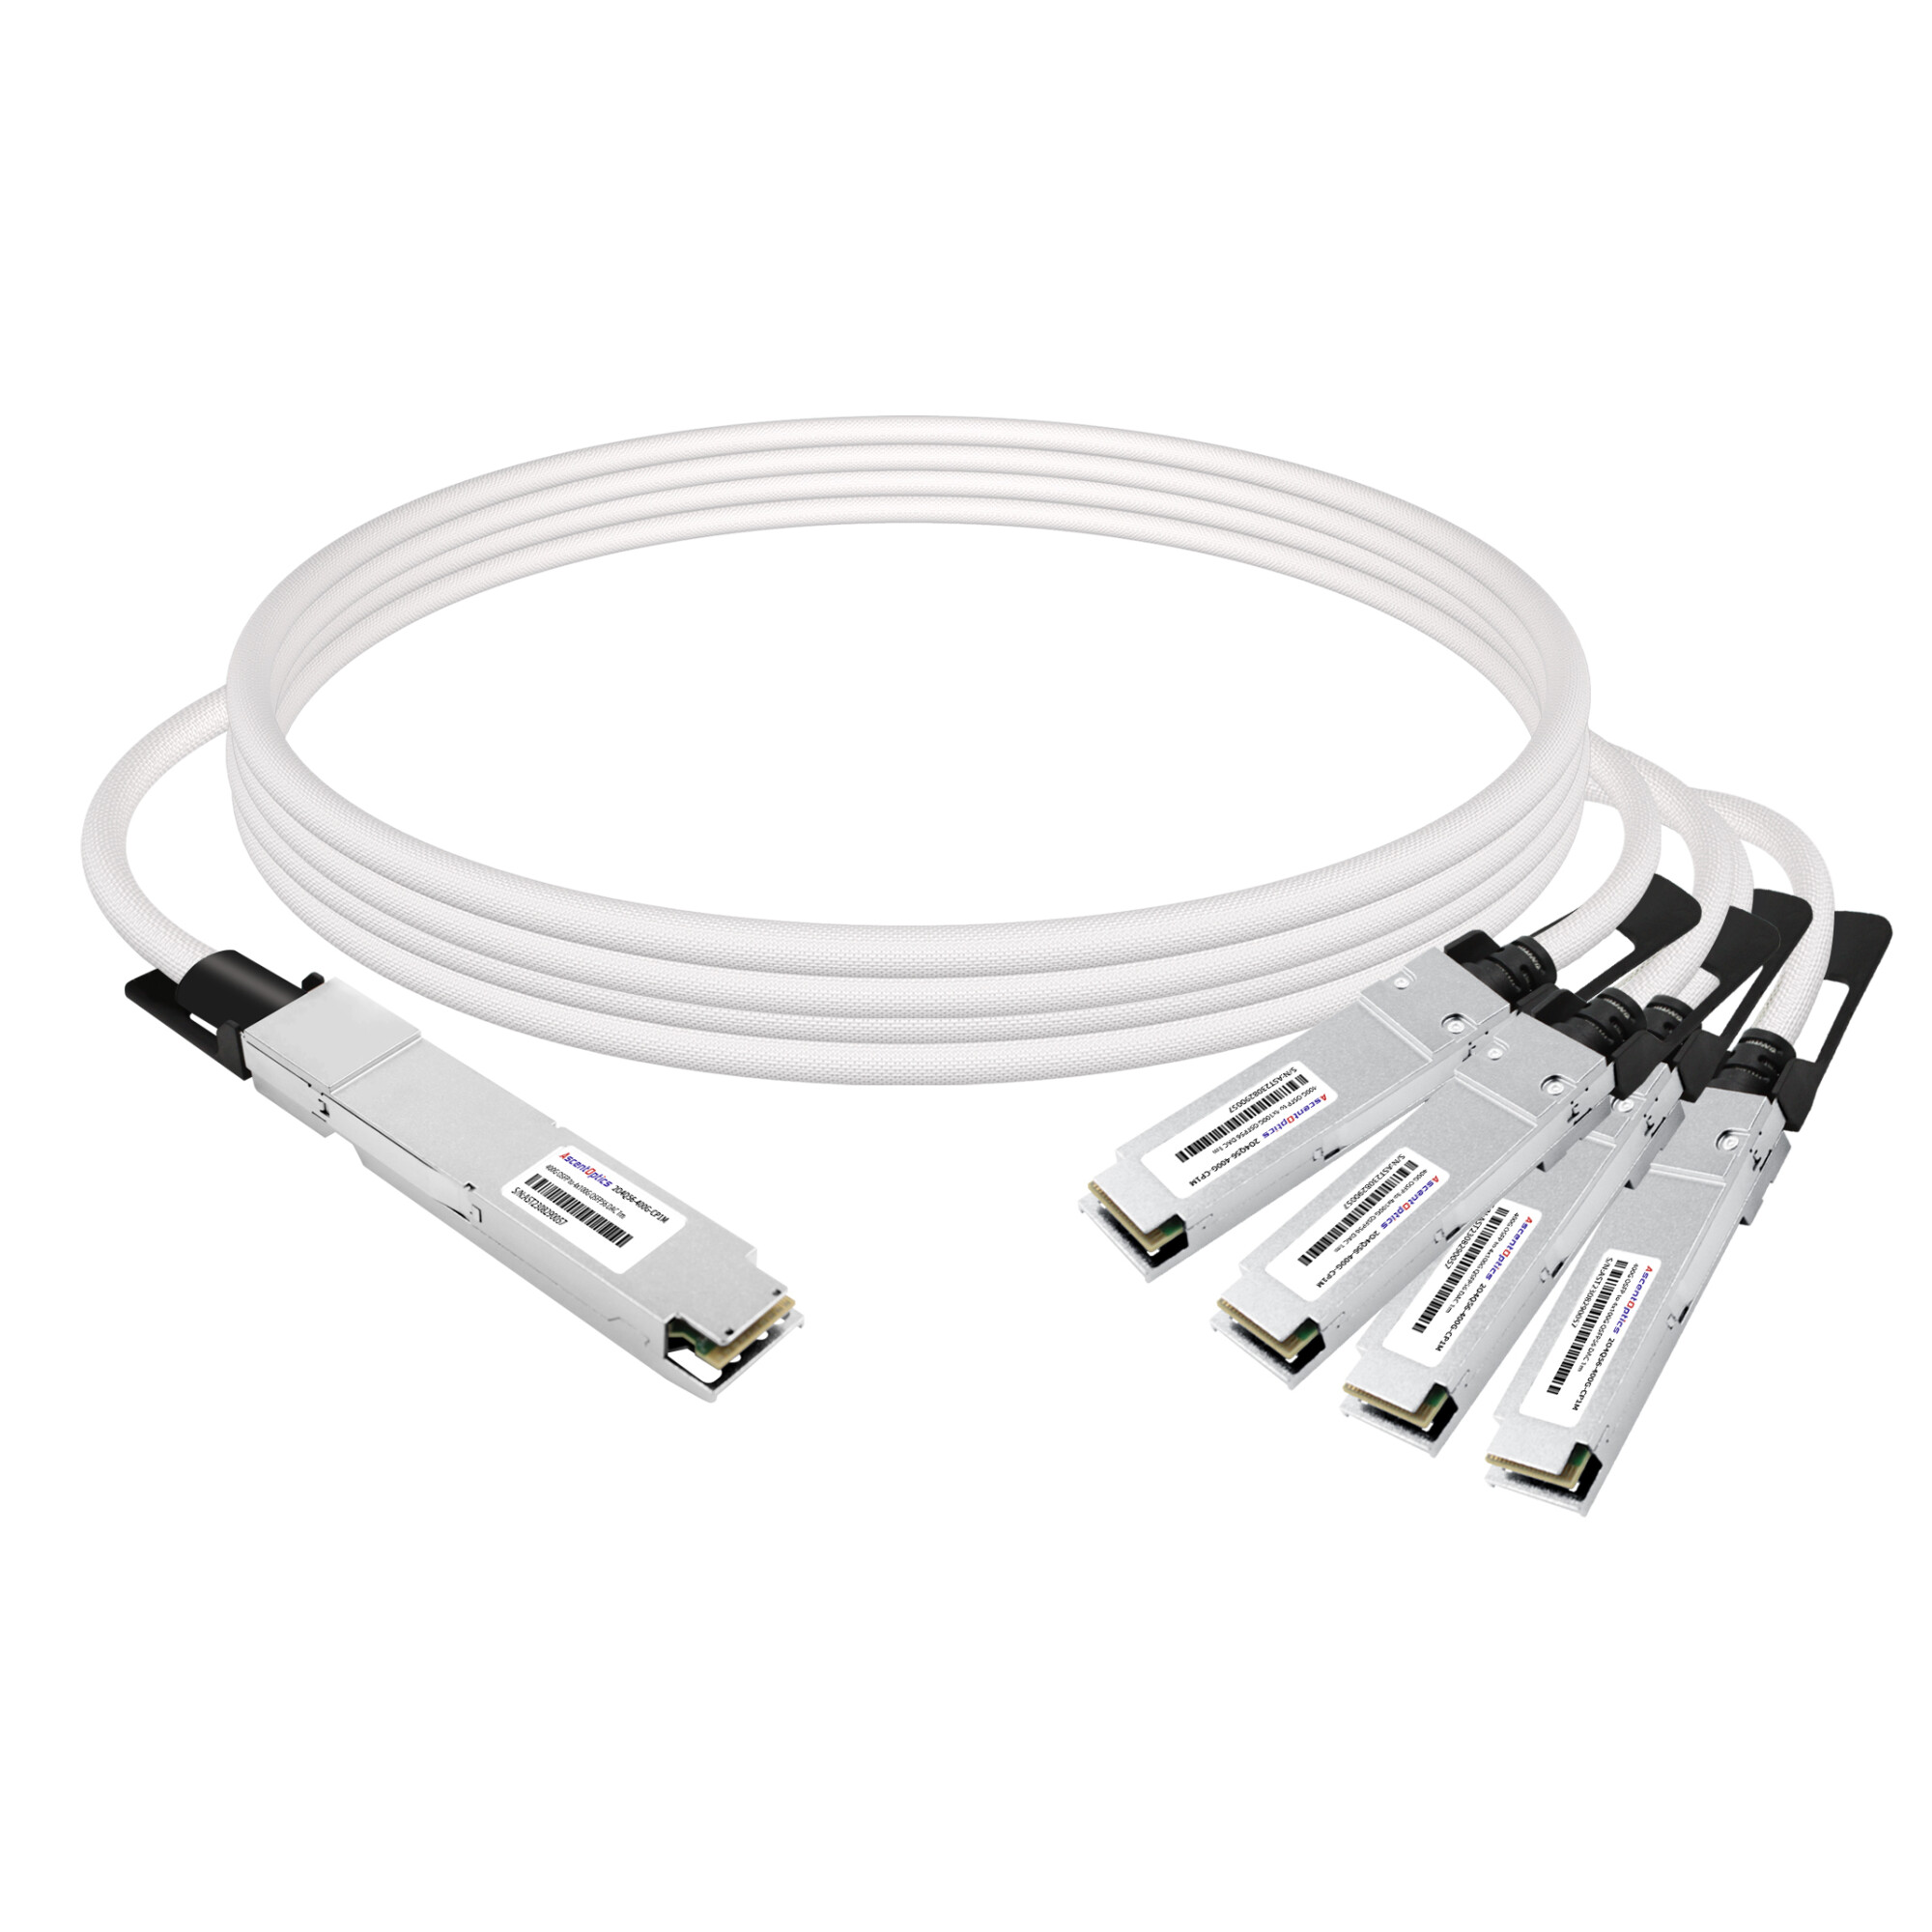 400G OSFP twin port to 4x 100G QSFP56 Copper Breakout Cable,1 Meter